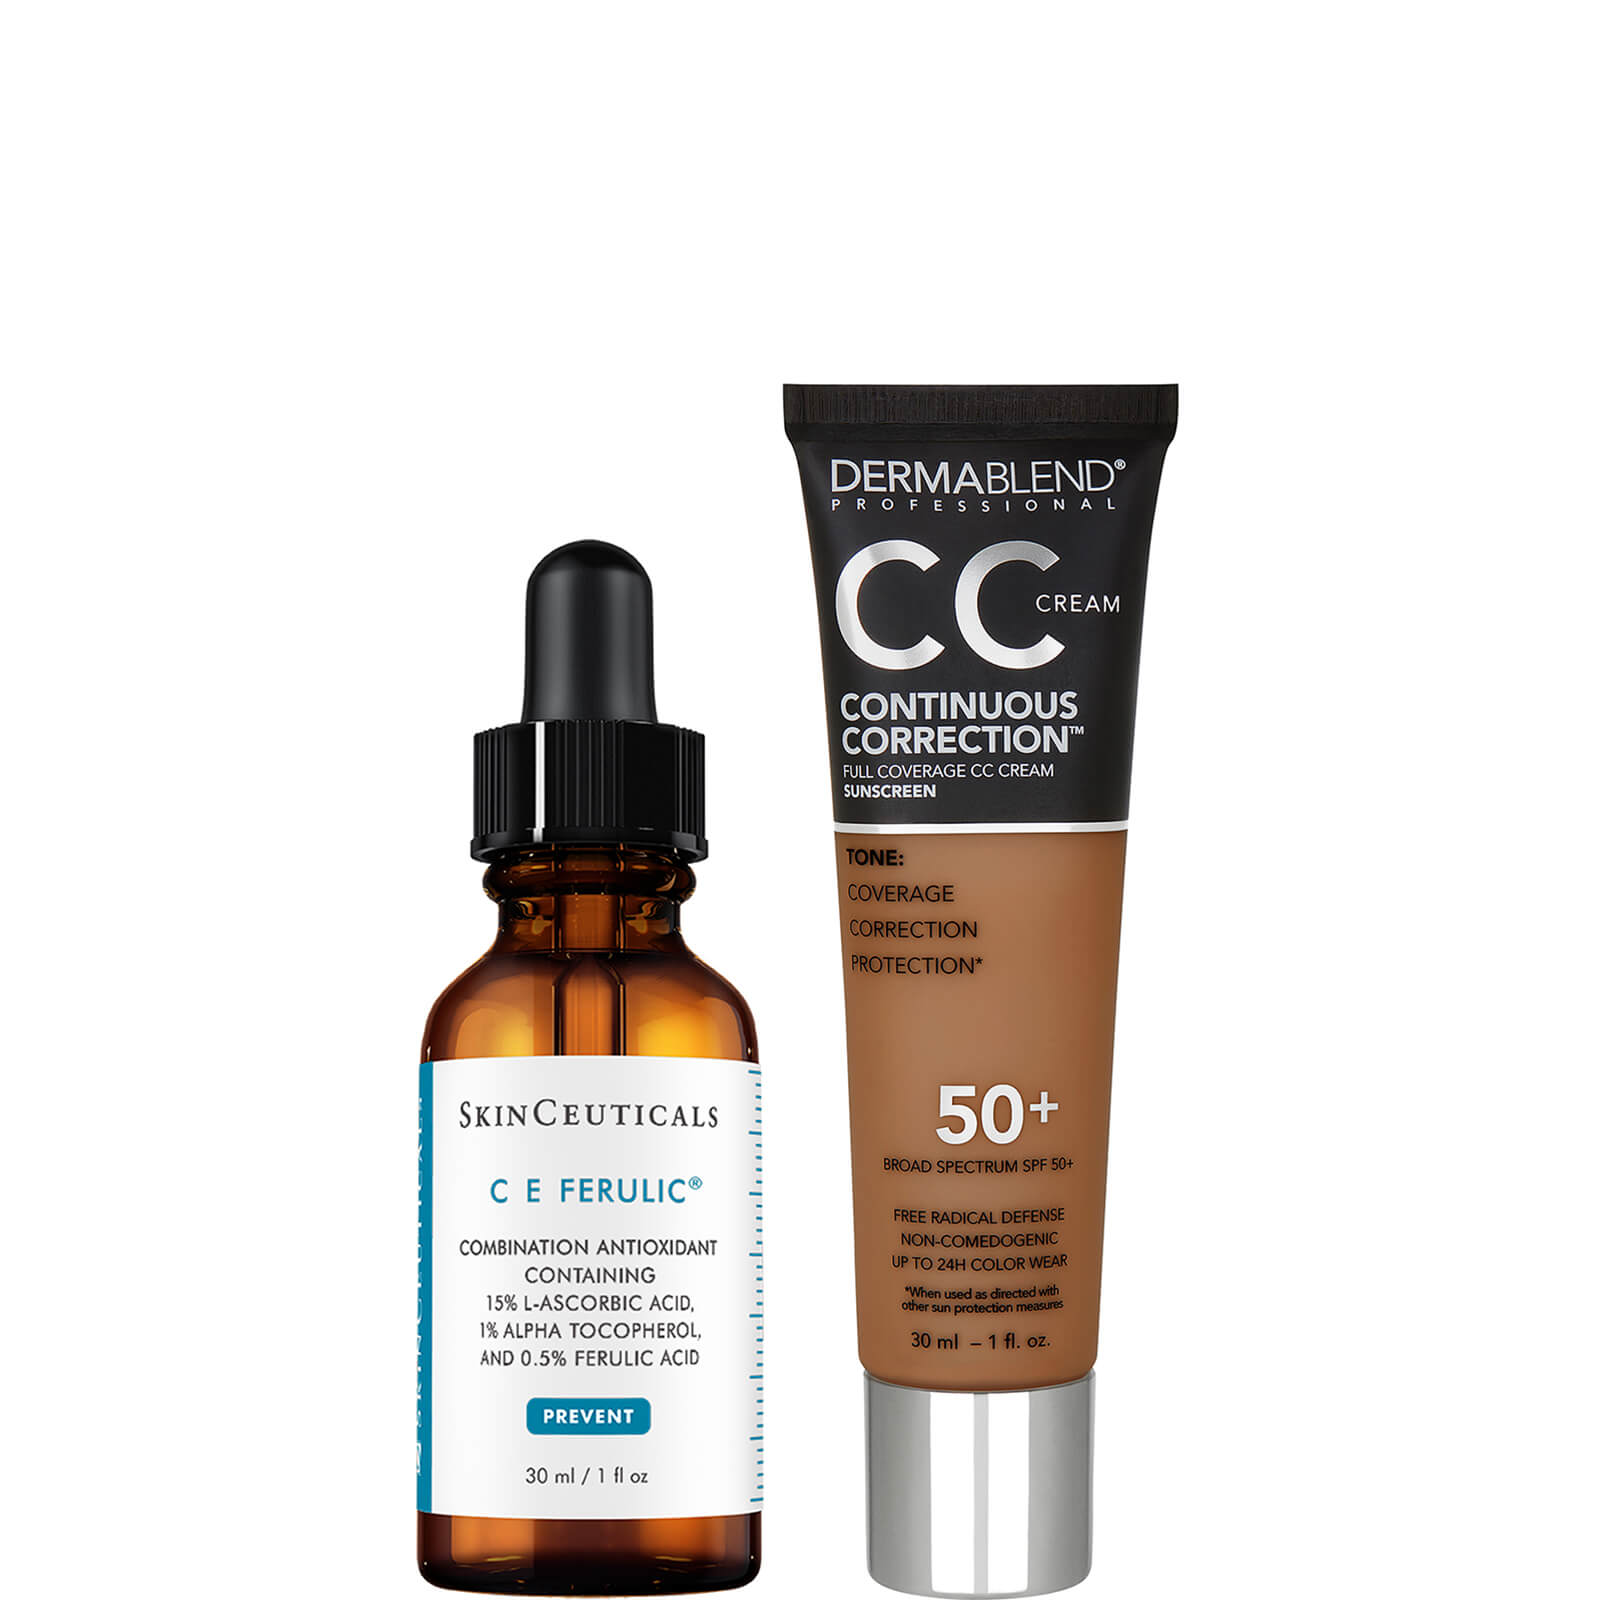 SkinCeuticals and Dermablend Anti-Aging Brightening Duo with Vitamin C and Niacinamide (Various Shades) ($223 Value) - 60N Tan 2